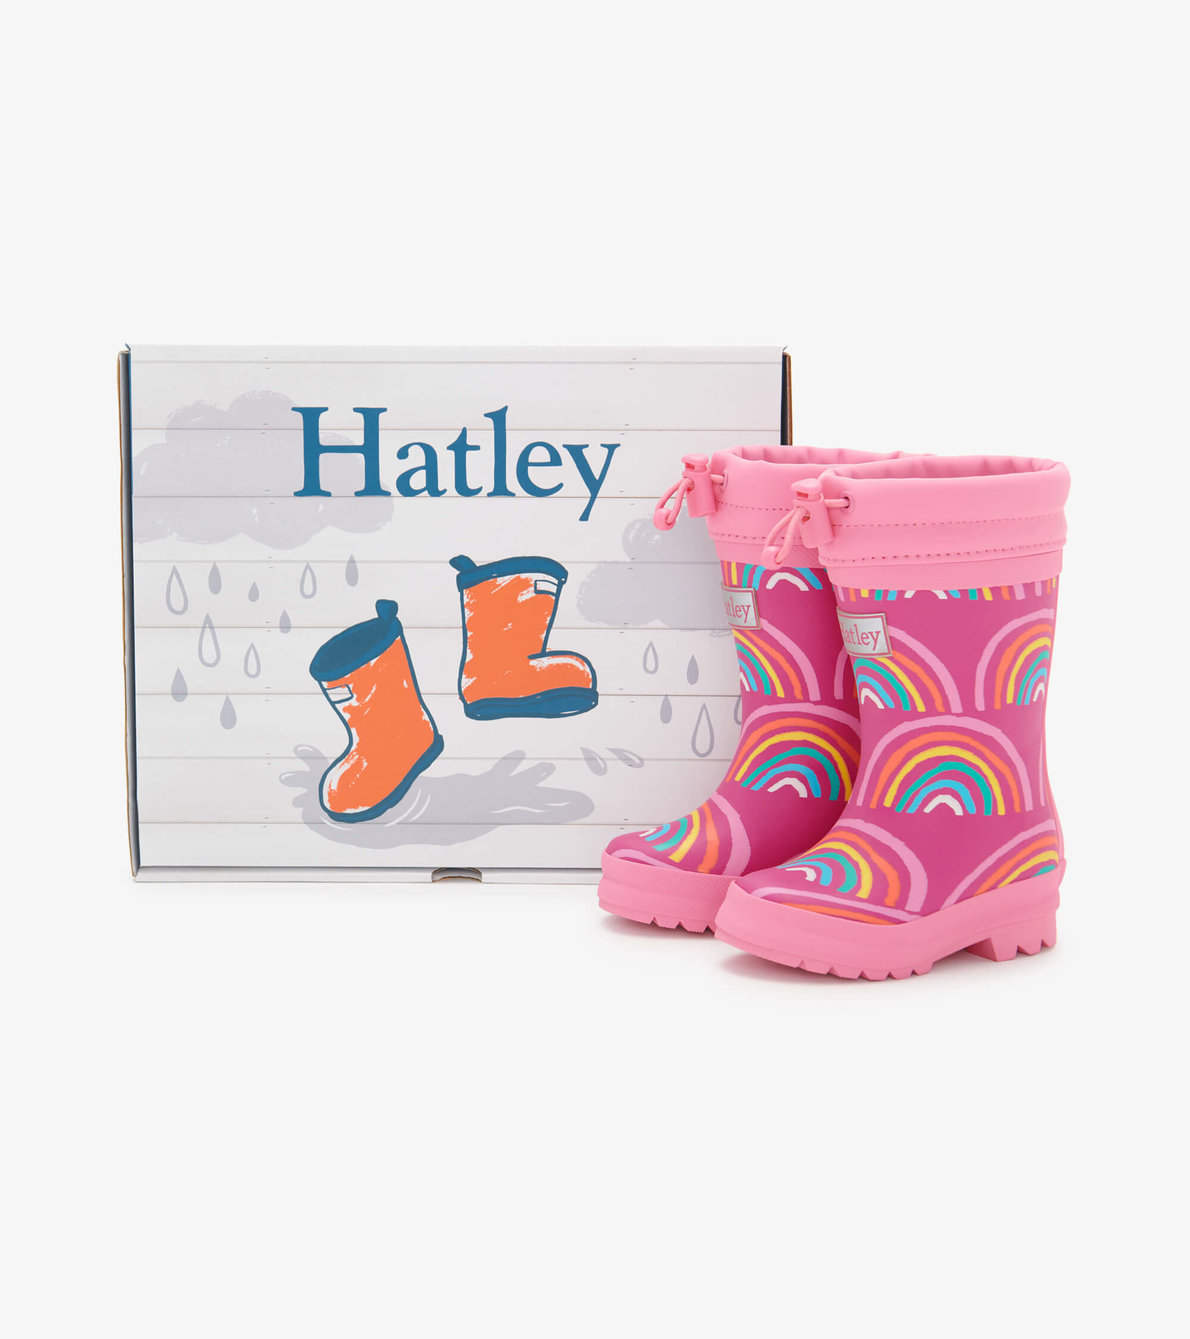 View larger image of Rainy Rainbows Sherpa Lined Baby Wellies